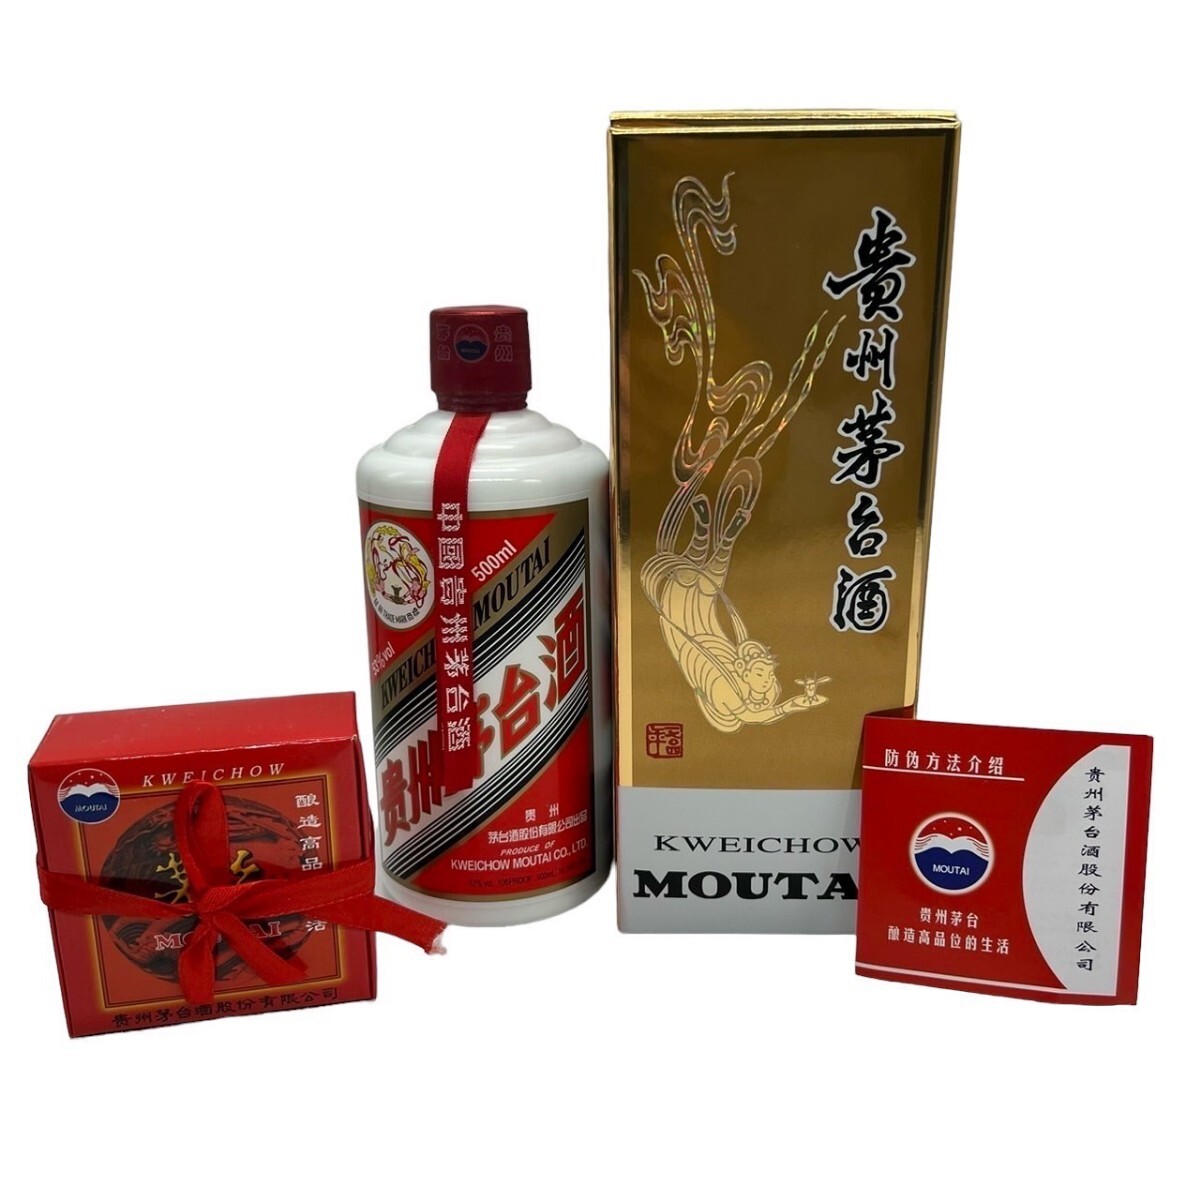 ... pcs sake mao Thai sake heaven woman label 2021 MOUTAI KWEICHOW China sake 500ml 53% box booklet glass attaching 966g 4-15-86 including in a package un- possible N